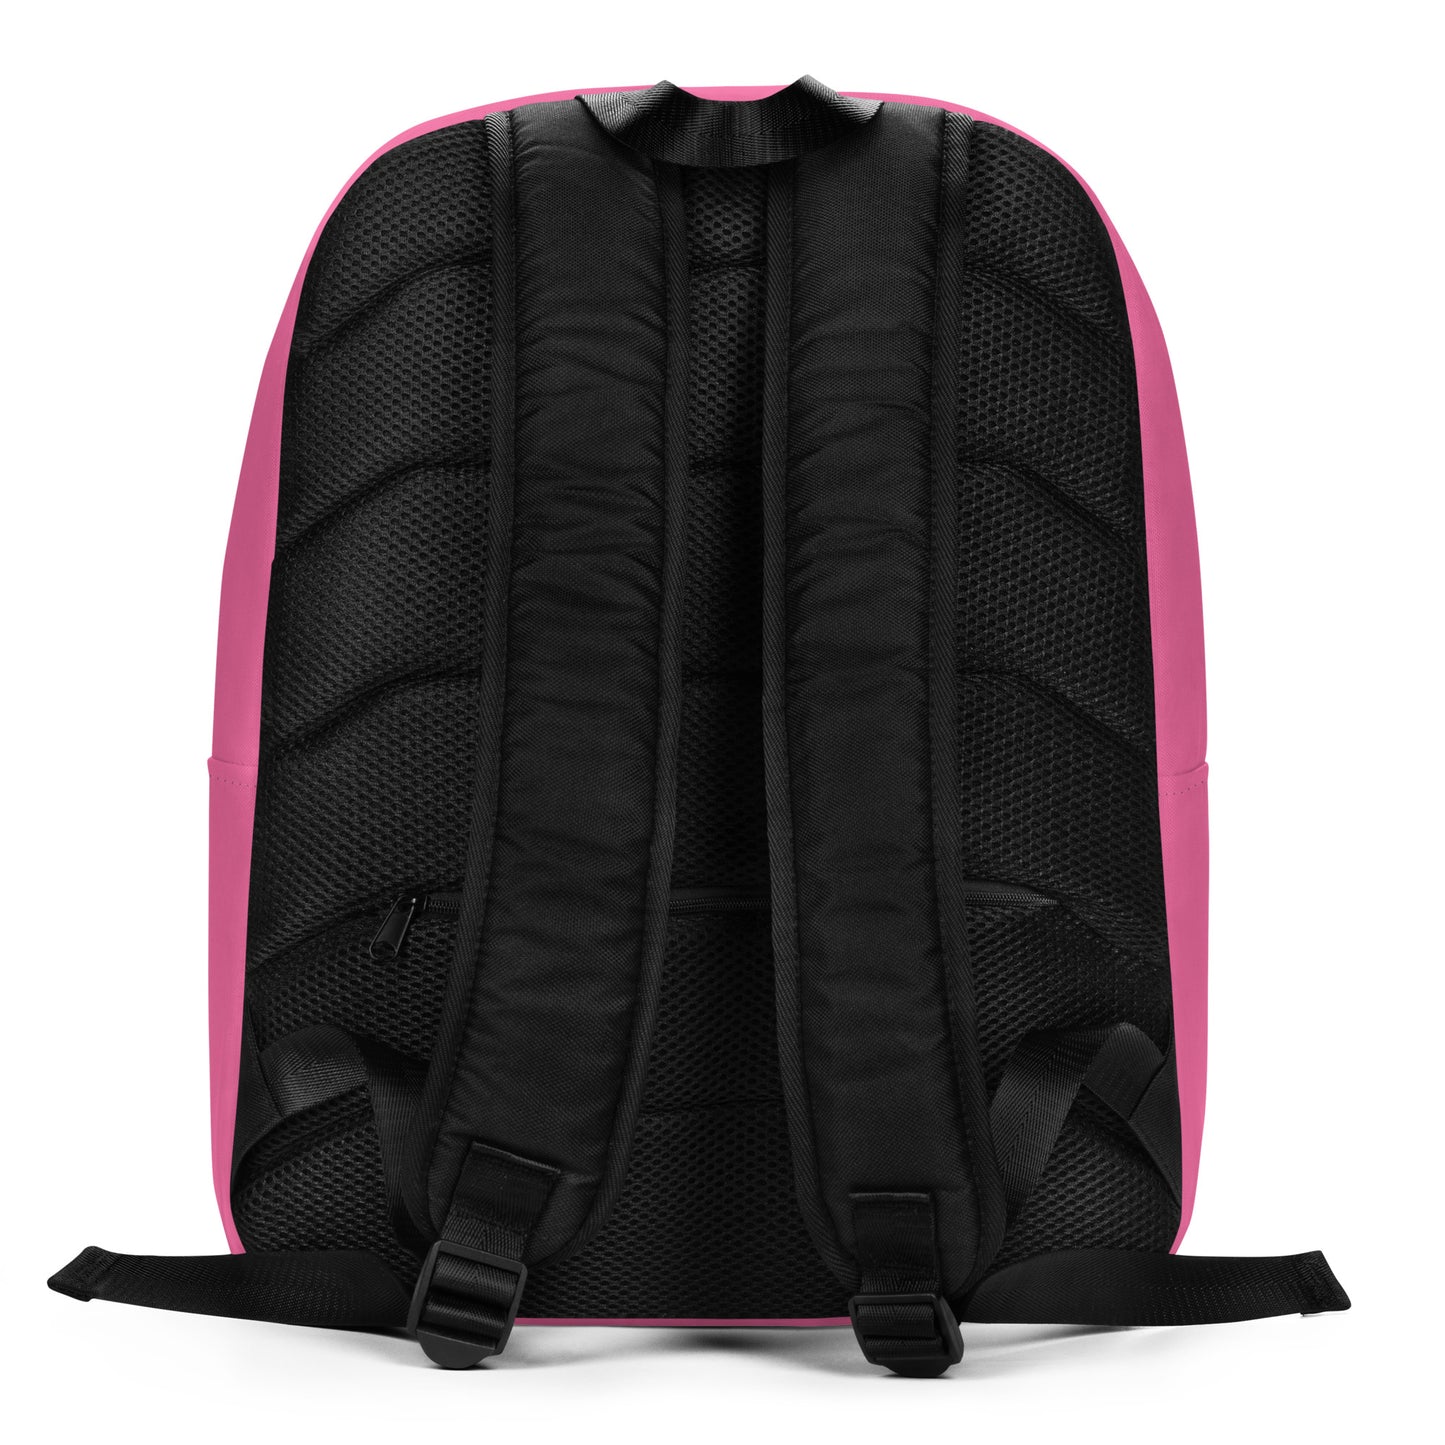 Pink Polkadot - Inspired By Harry Styles - Sustainably Made Backpack